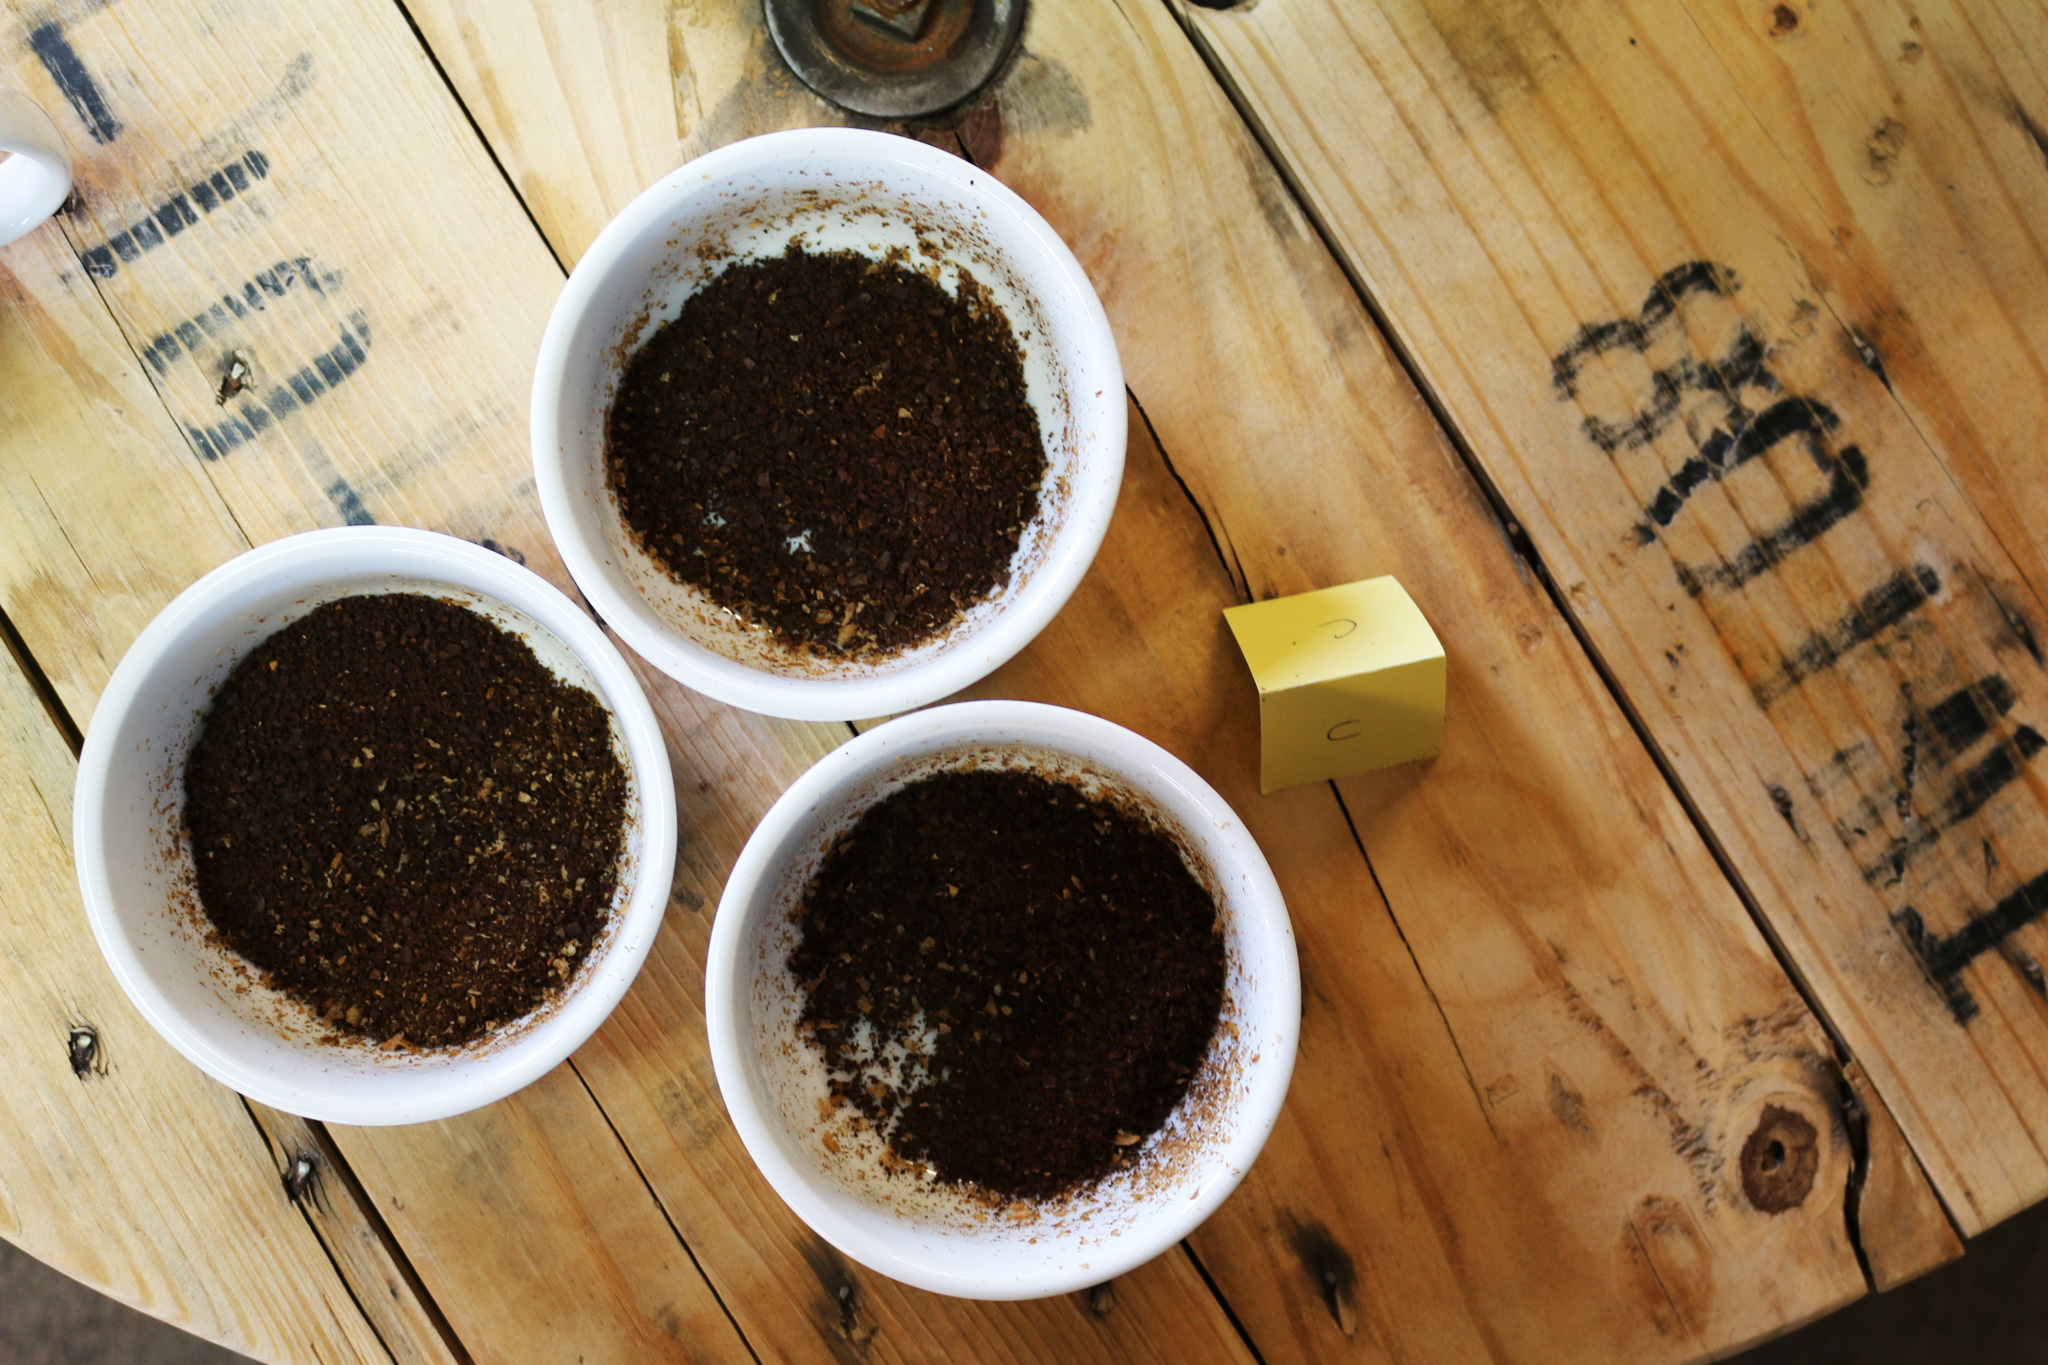 Fresh Grounds at Yellow Brick Coffee Cupping Event (Credit: Adam Lehrman)